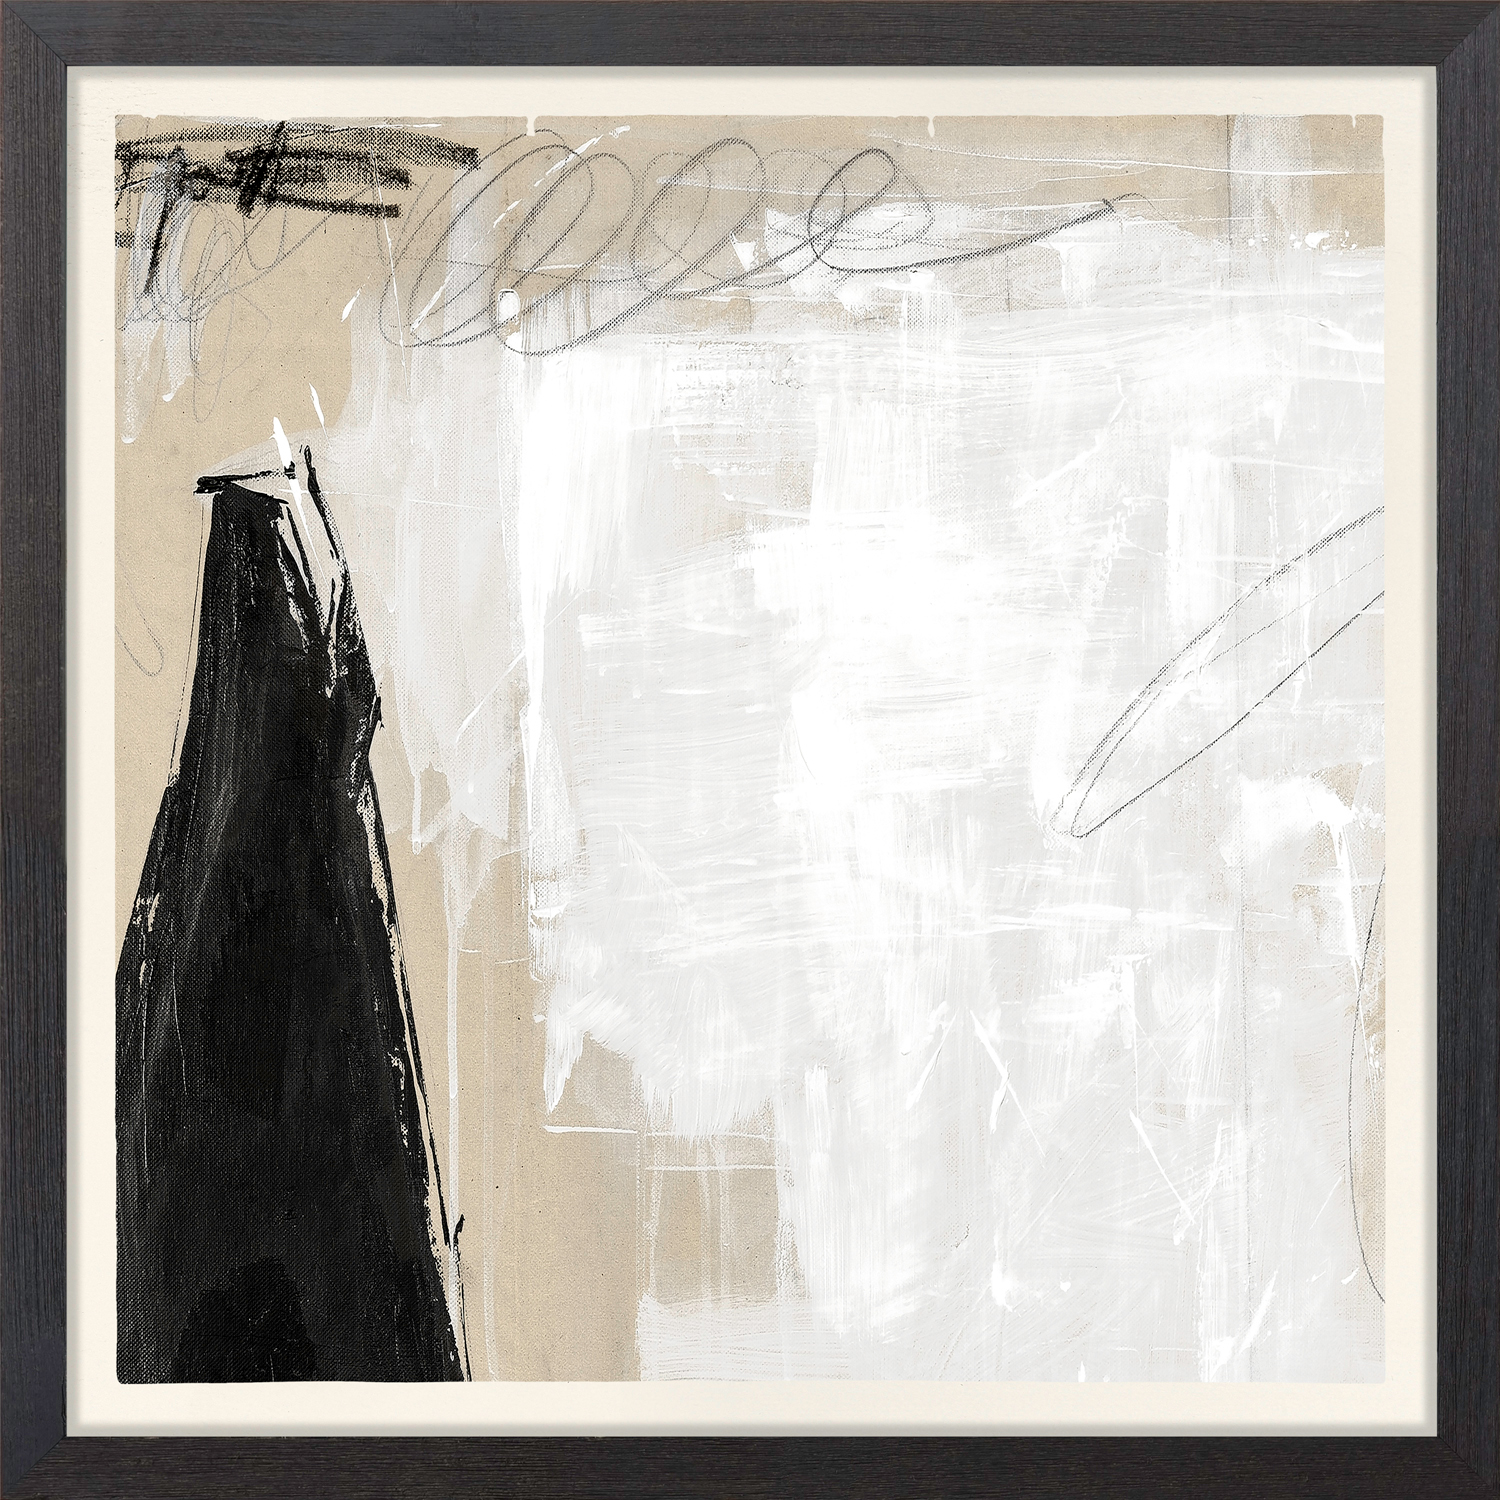 Framed abstract painting with expressive gestures in black and white on a beige background.